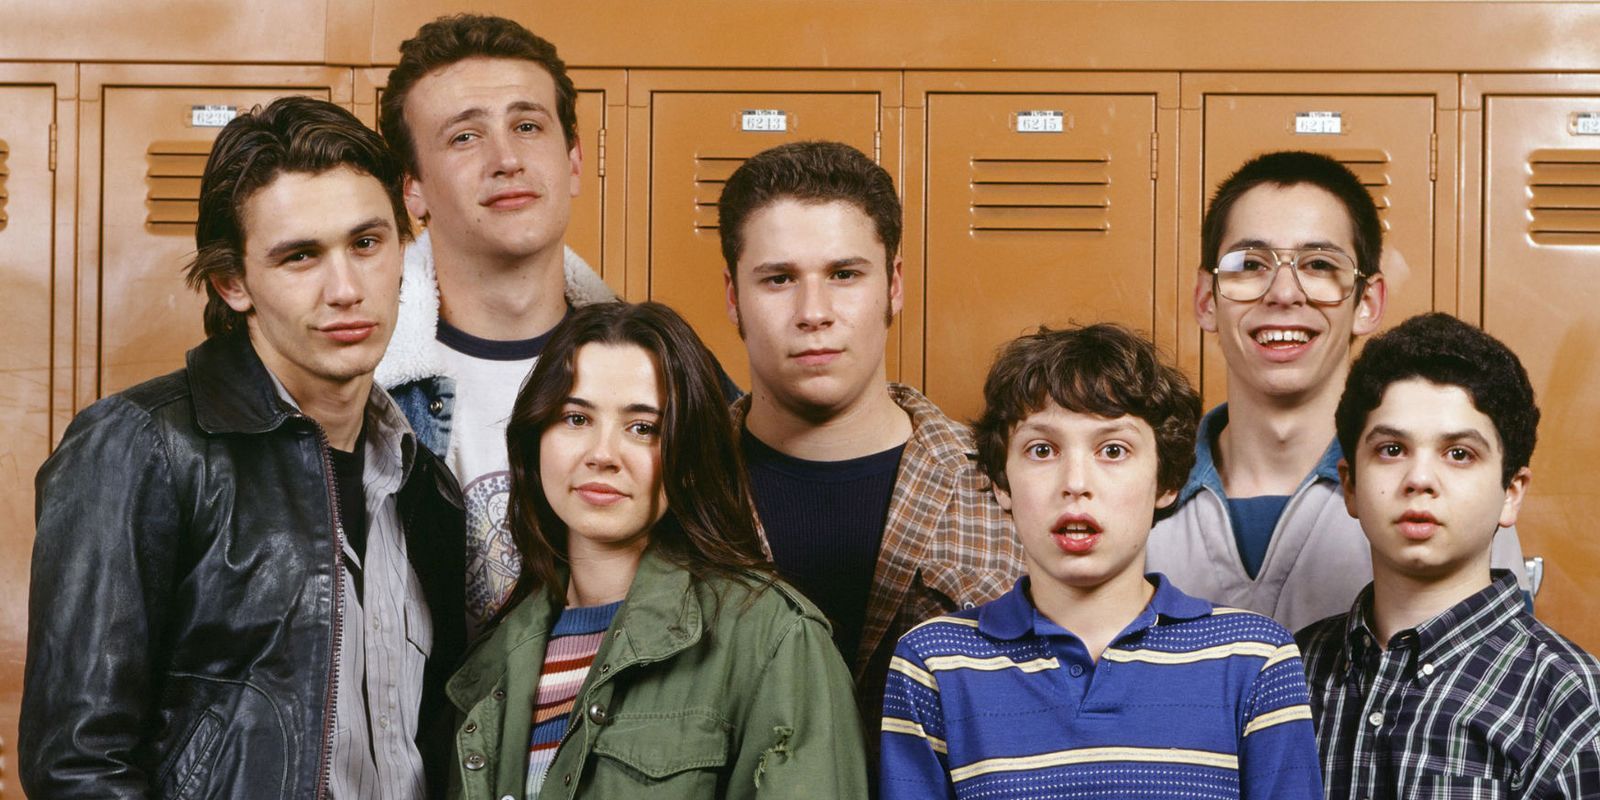 The Freaks And Geeks cast in front of lockers.